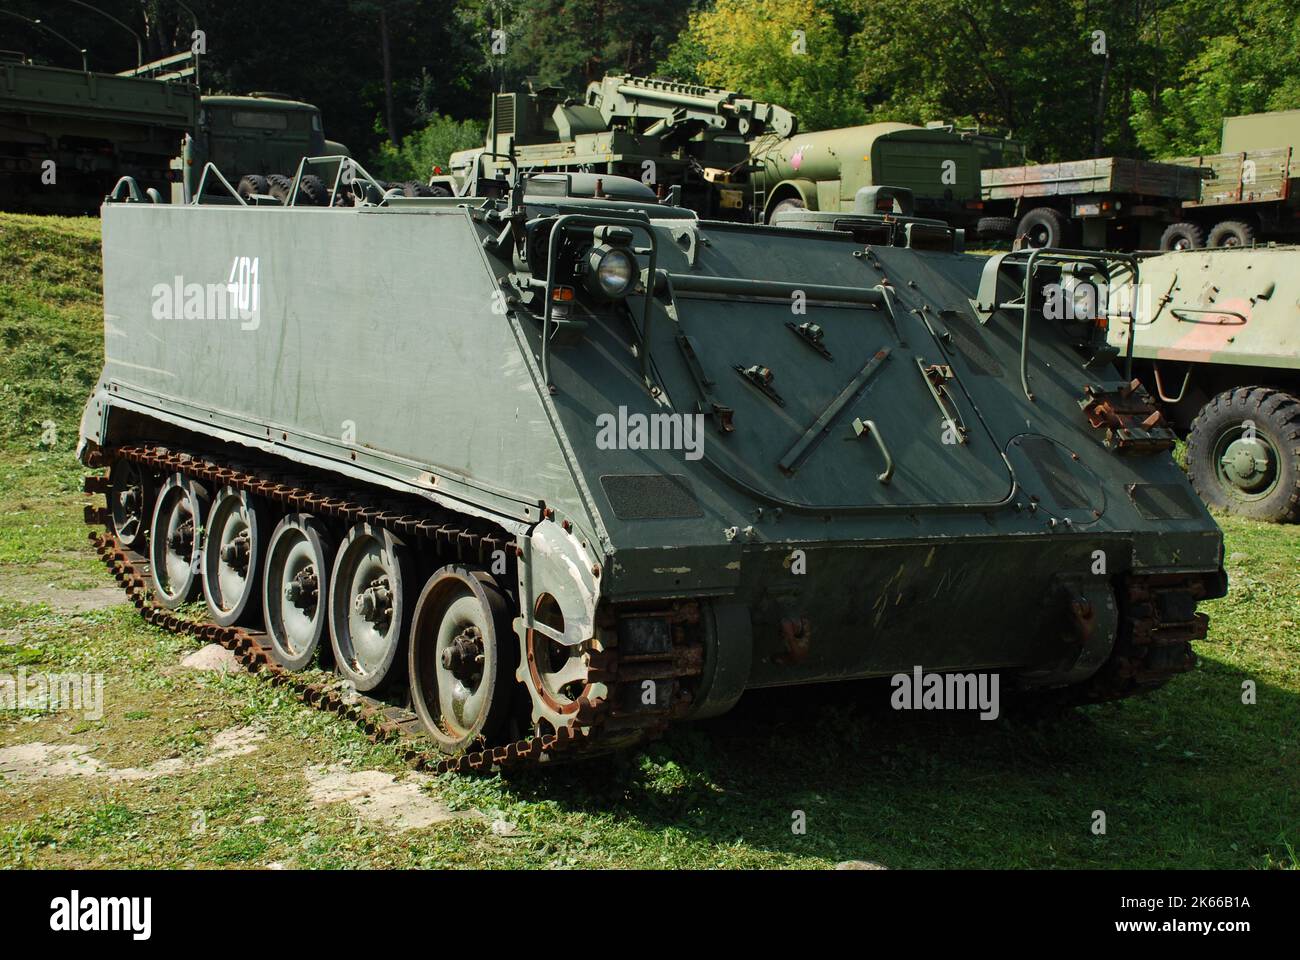 M113 armored personnel carrier Stock Photo